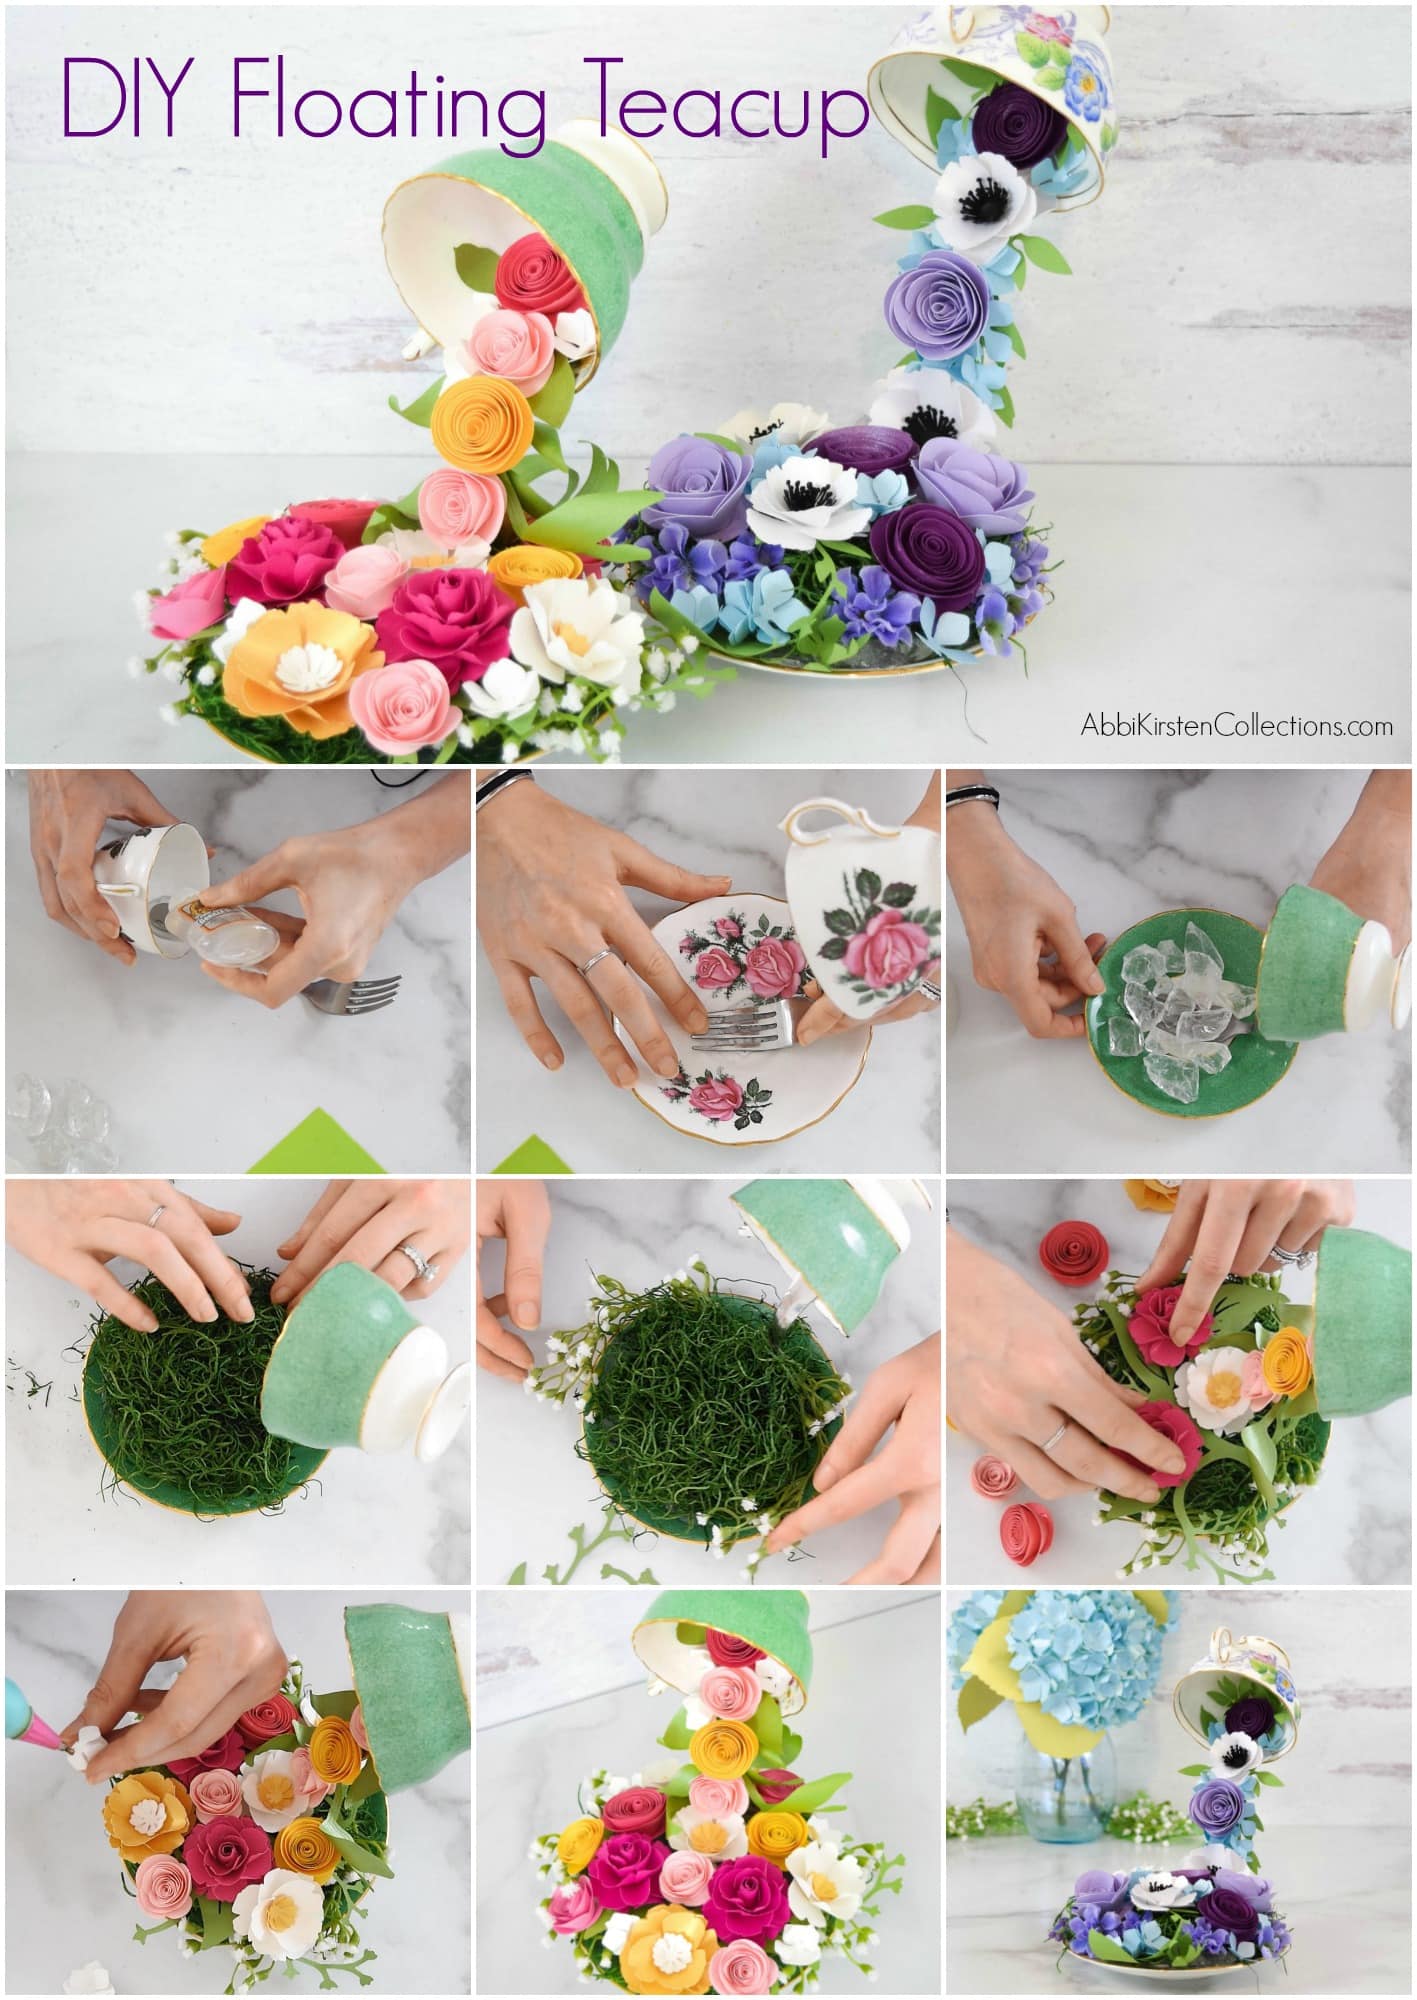 A collage of images shows all of the details steps to make floating tea cups with cascading paper flowers, from attaching the fork for the illusion floating cup, to adding faux moss, and flowers.